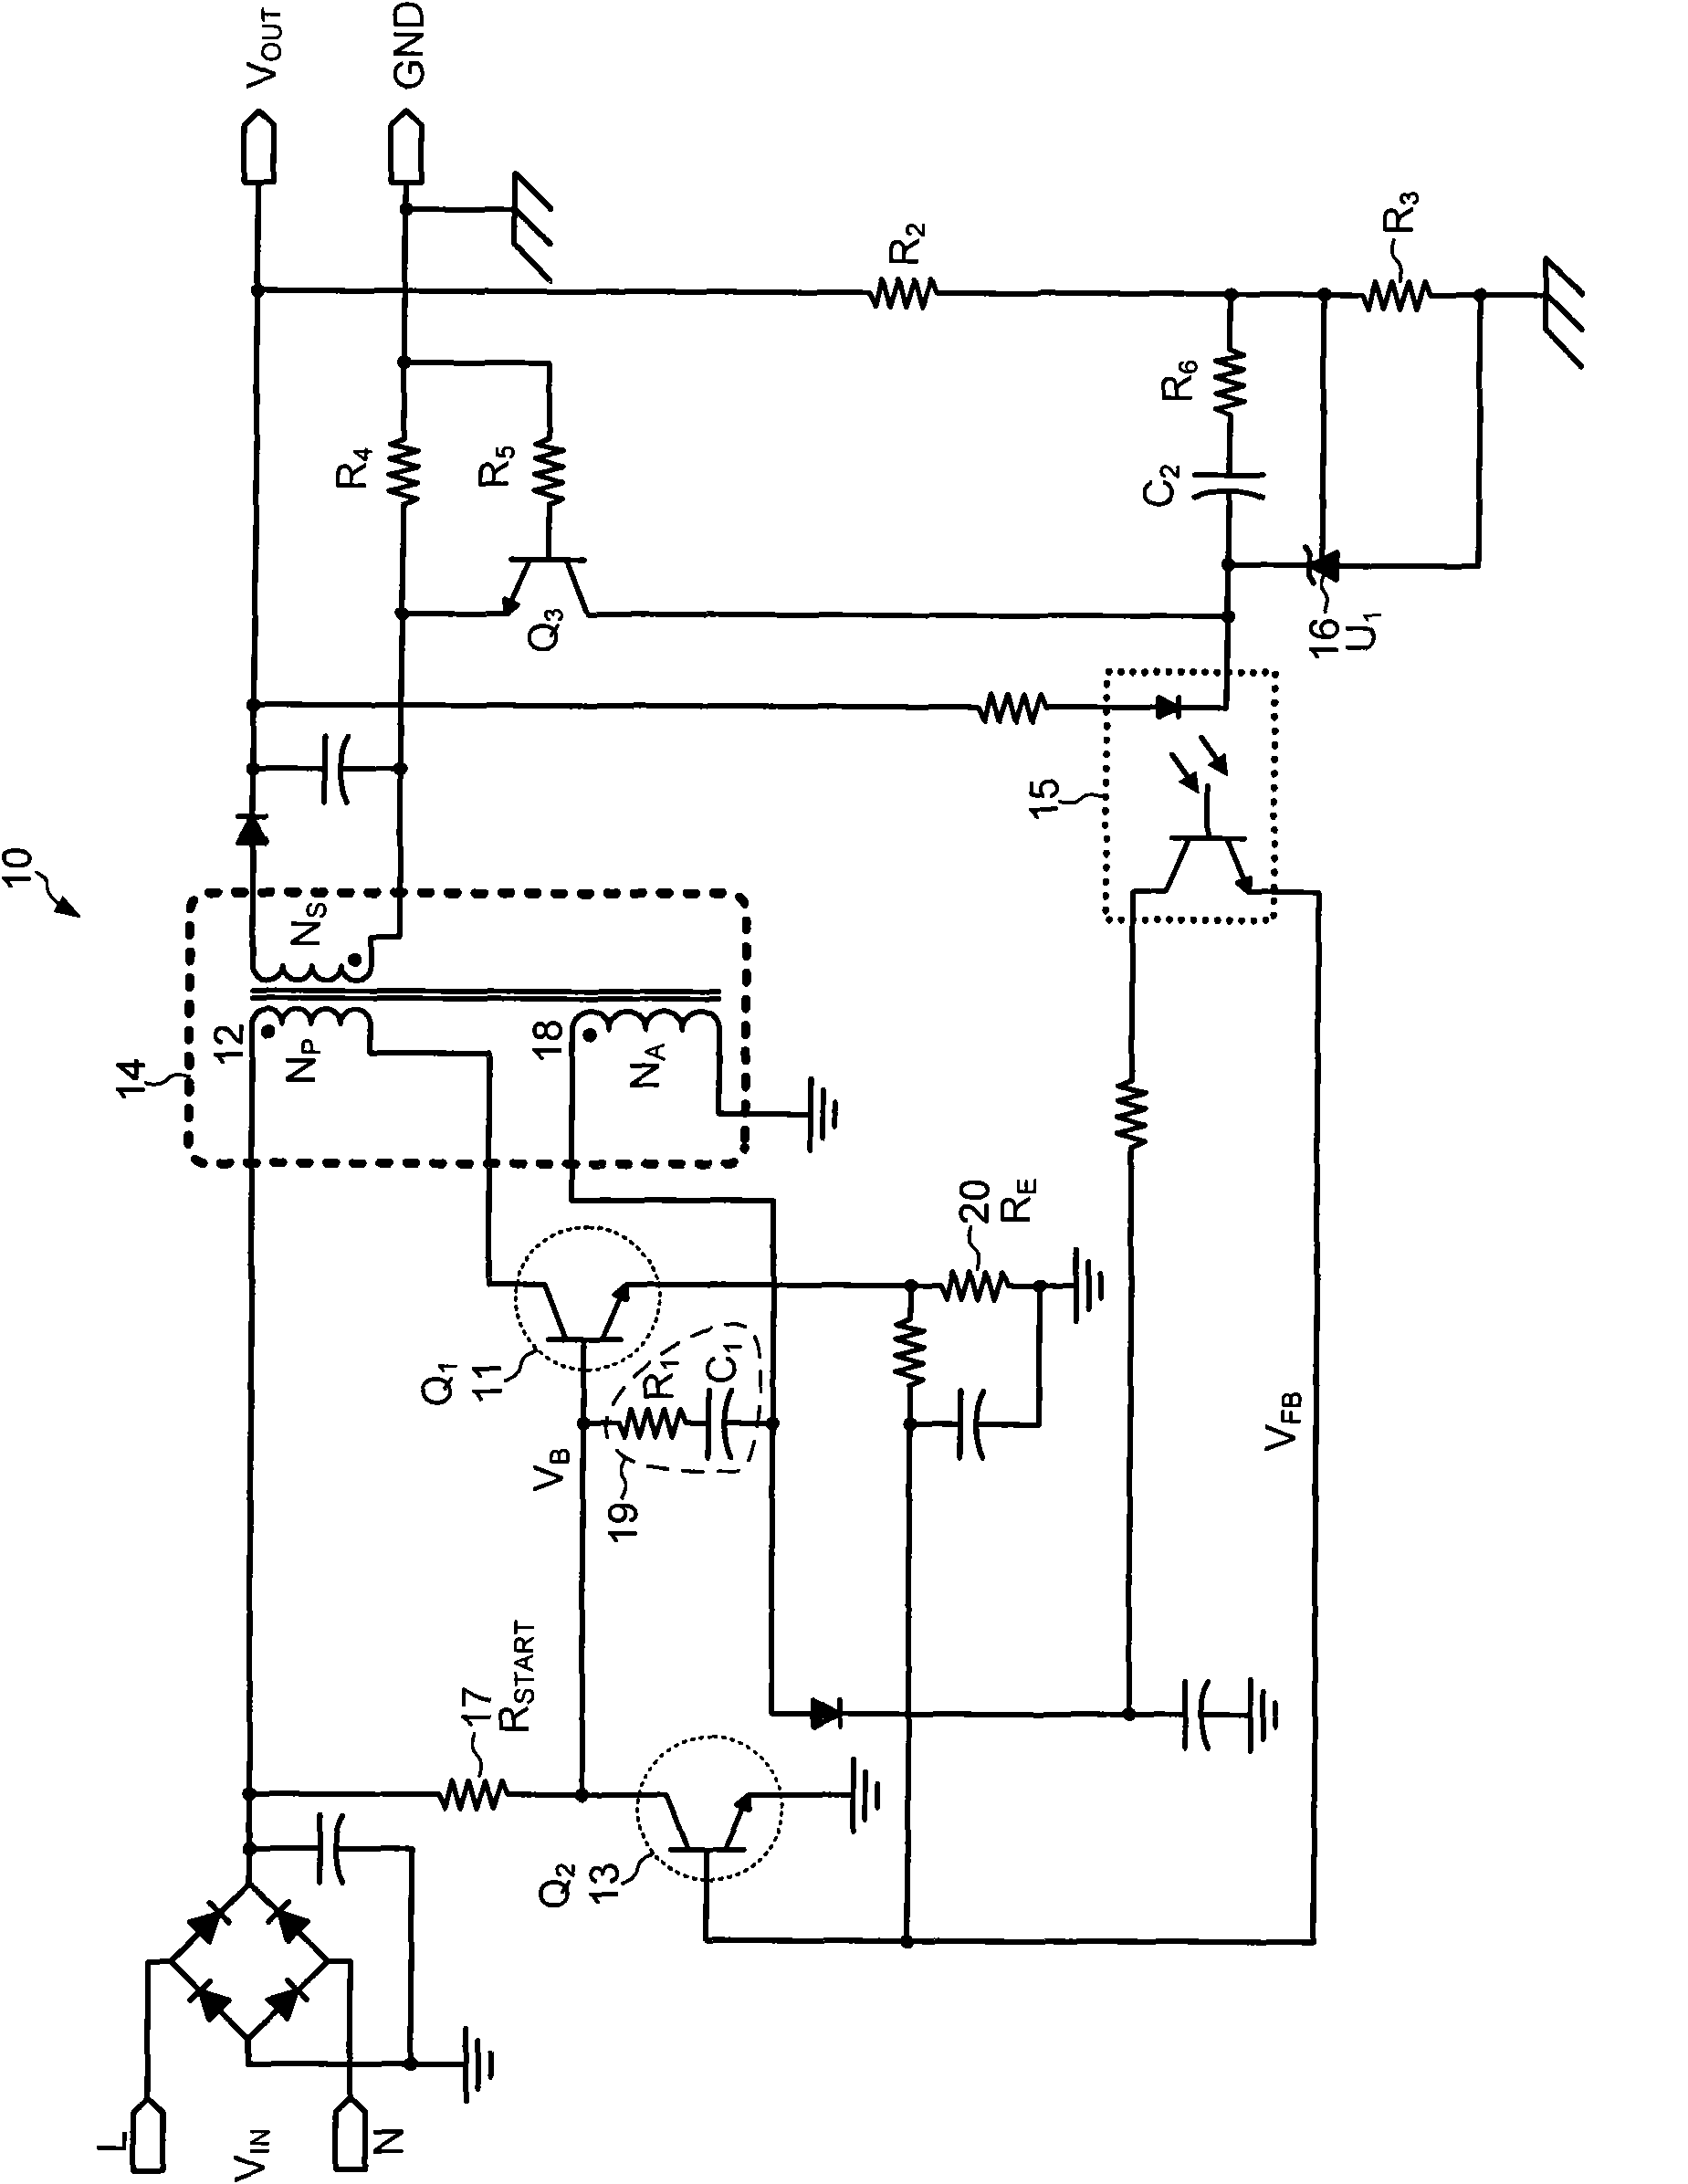 Three-pin package constant current and voltage controller in critical conduction mode